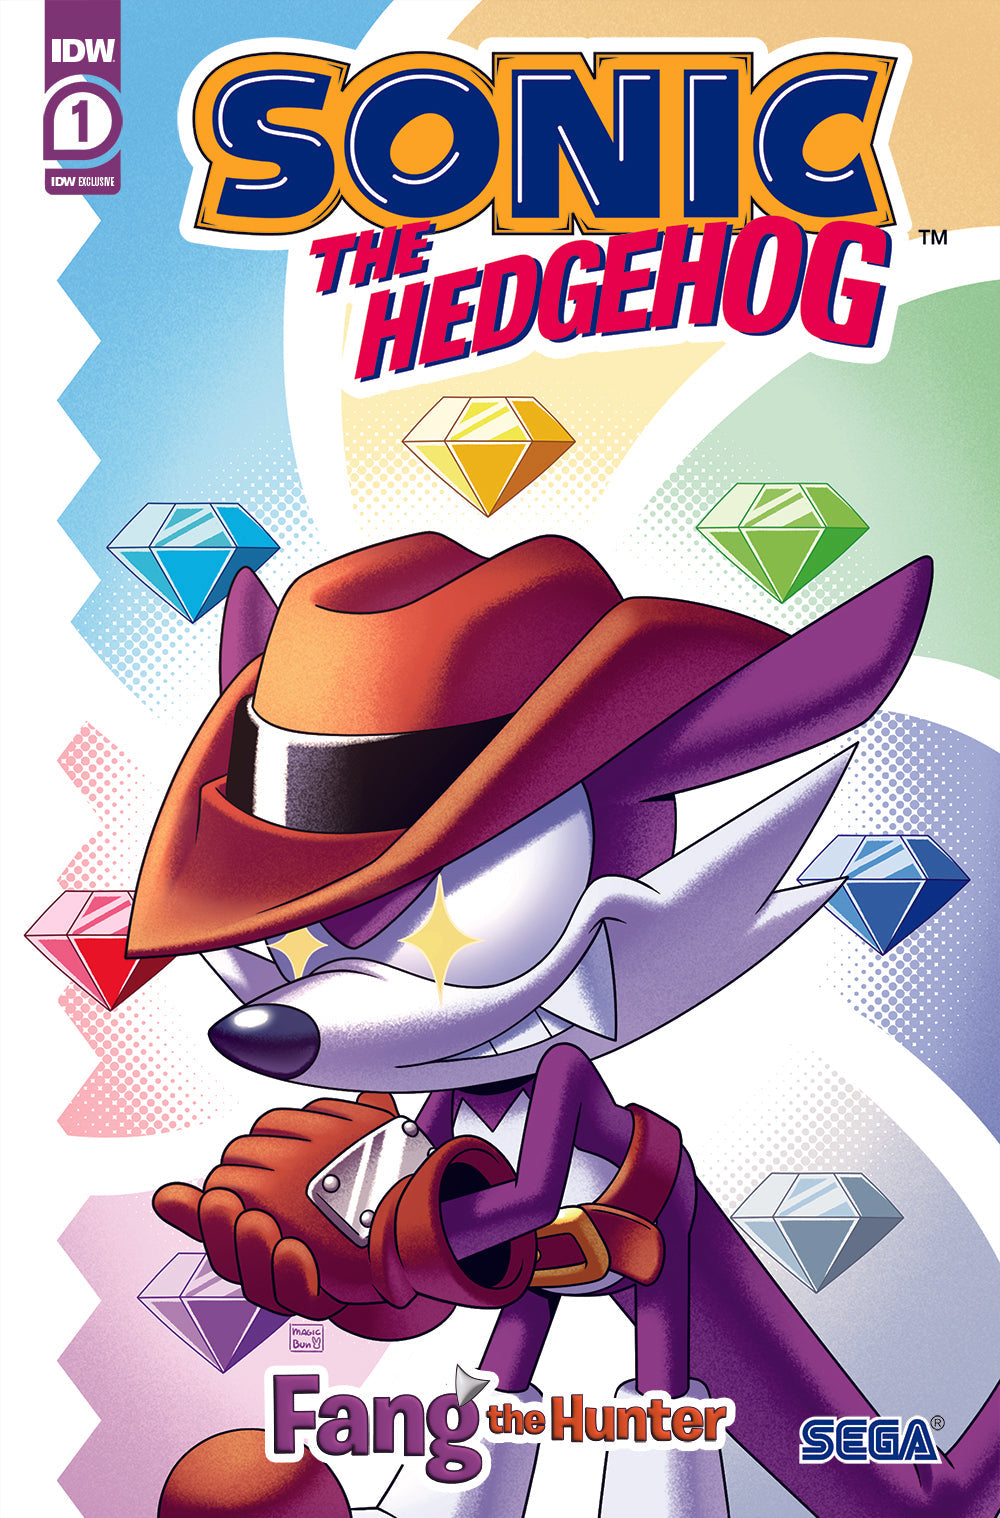 Sonic the Hedgehog: Fang the Hunter #1 - IDW Foil Exclusive